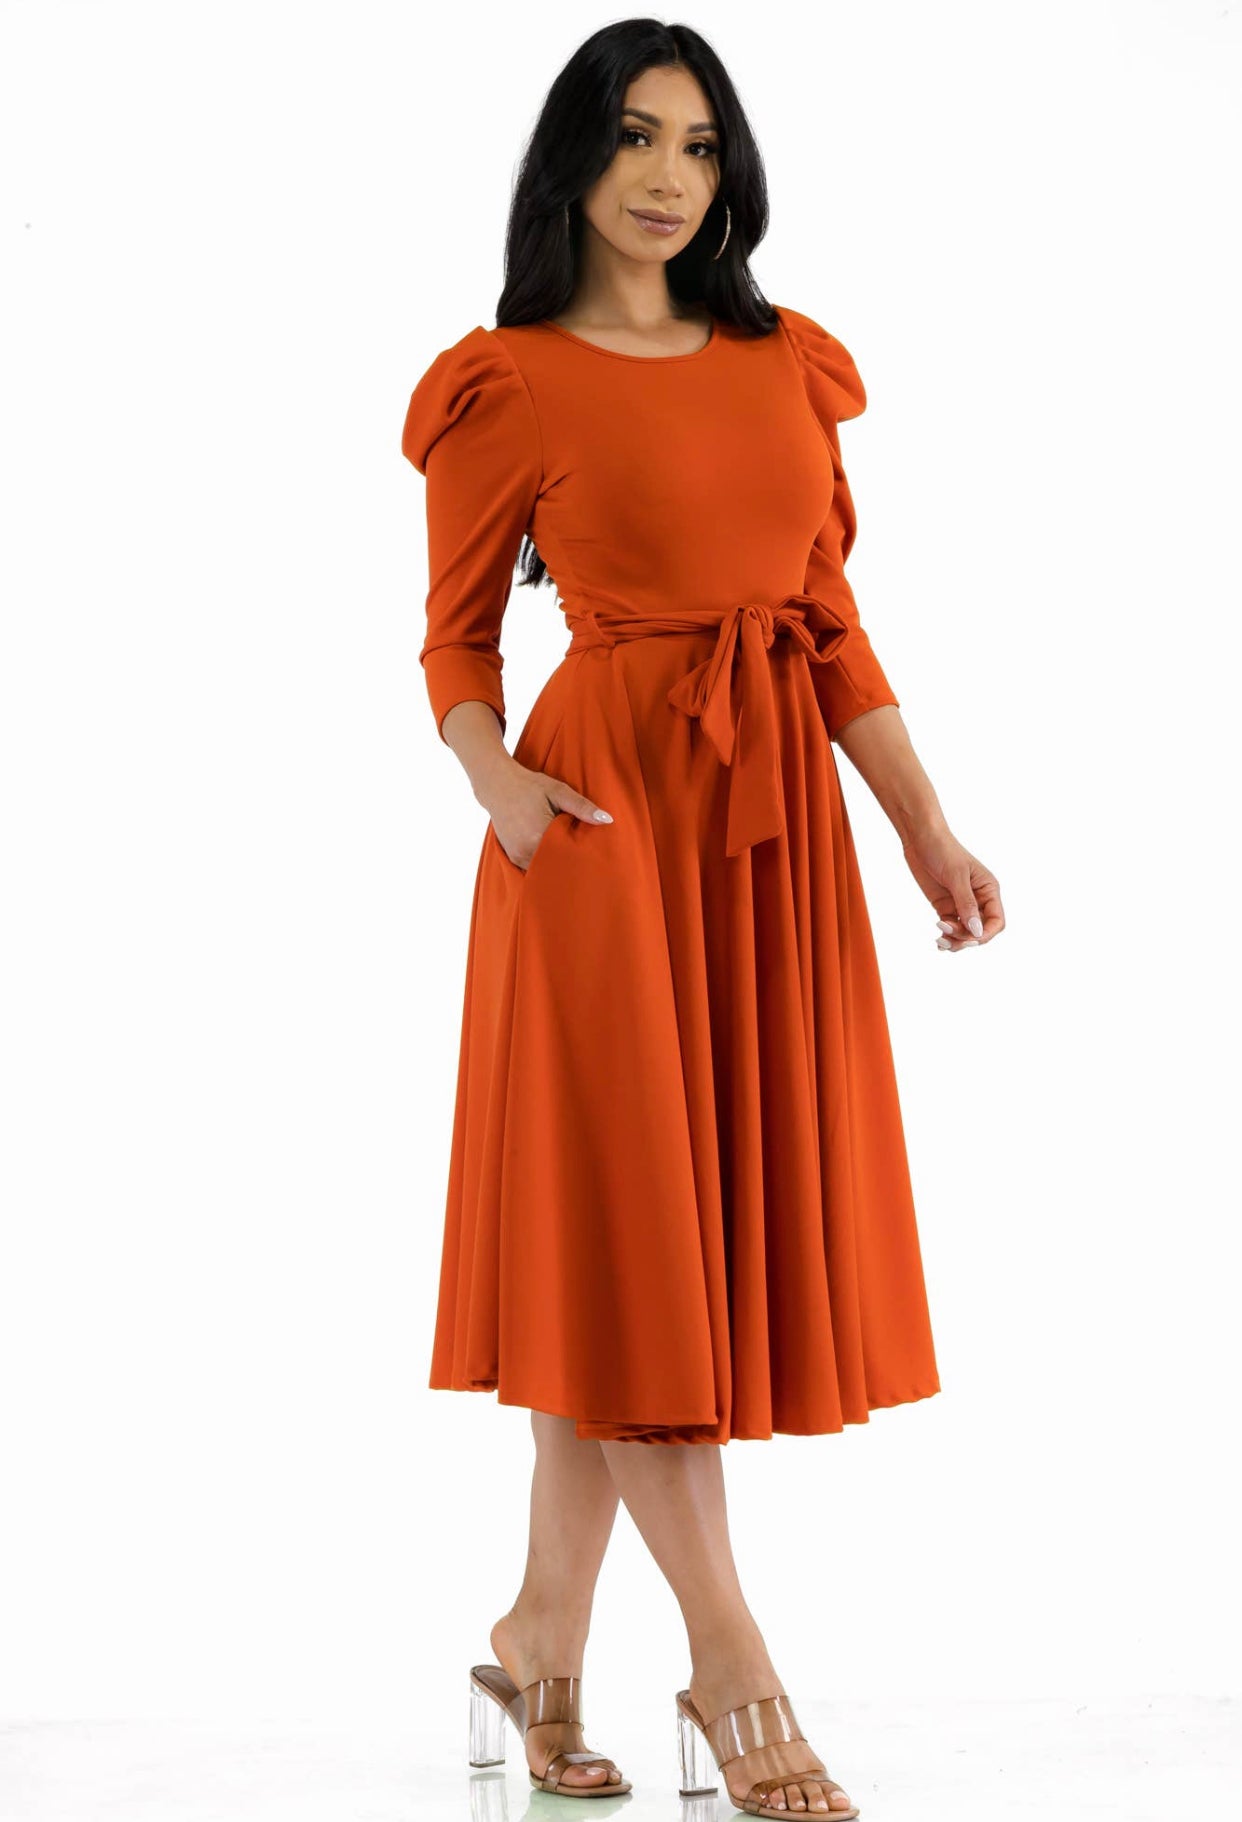 Puff Sleeve Cocktail Dress, Sizes 1X - 3X (Rust Color)